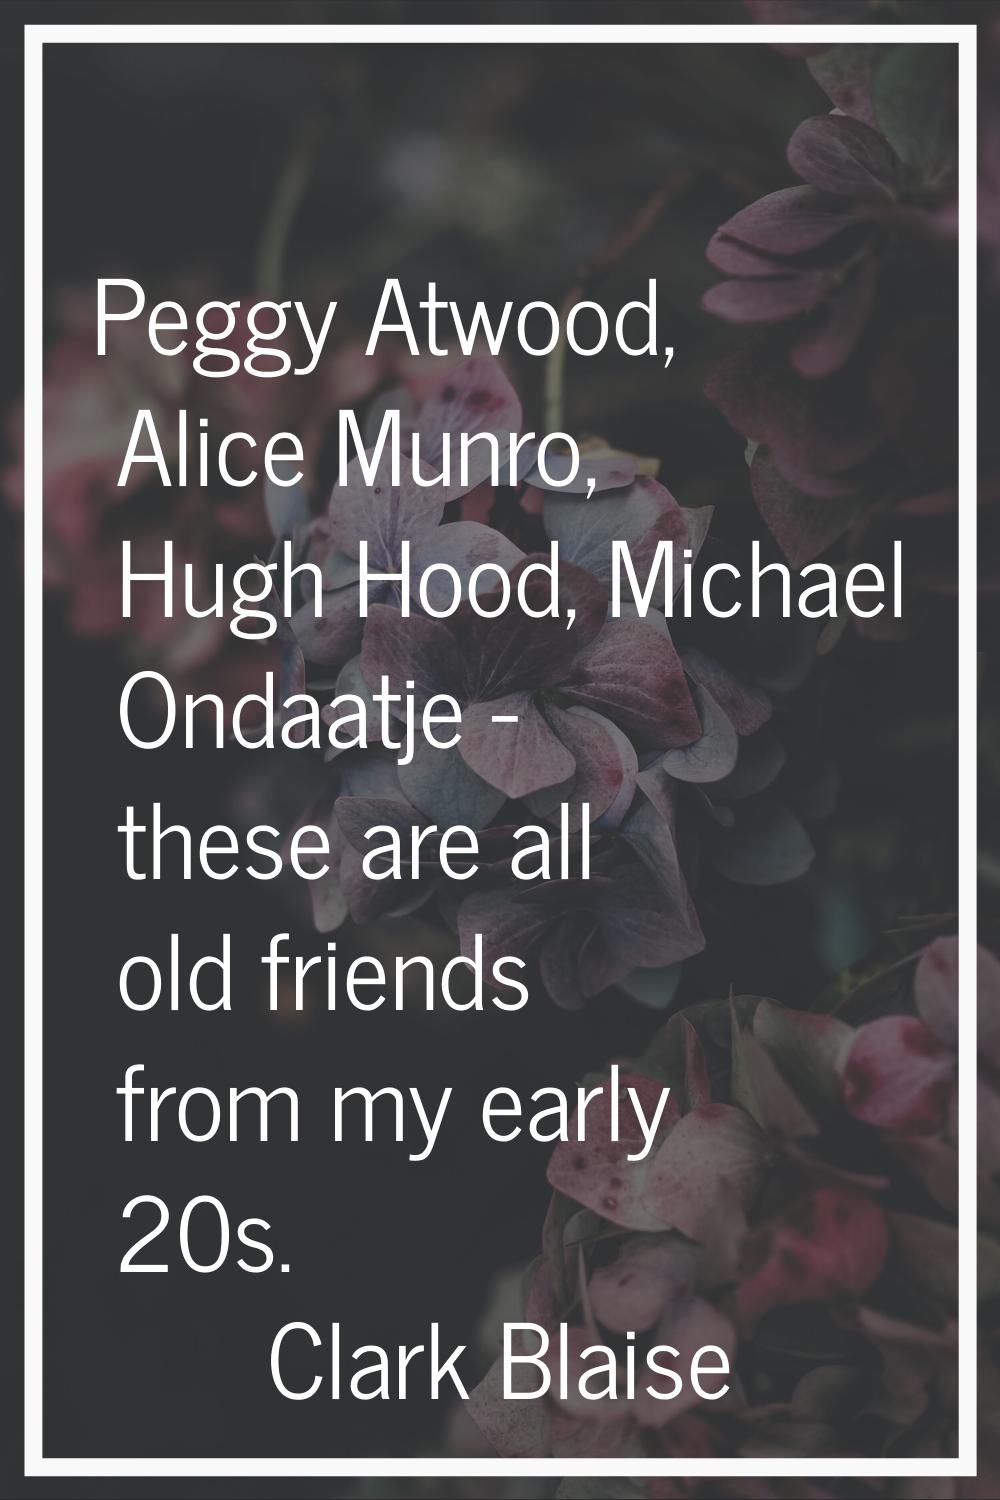 Peggy Atwood, Alice Munro, Hugh Hood, Michael Ondaatje - these are all old friends from my early 20